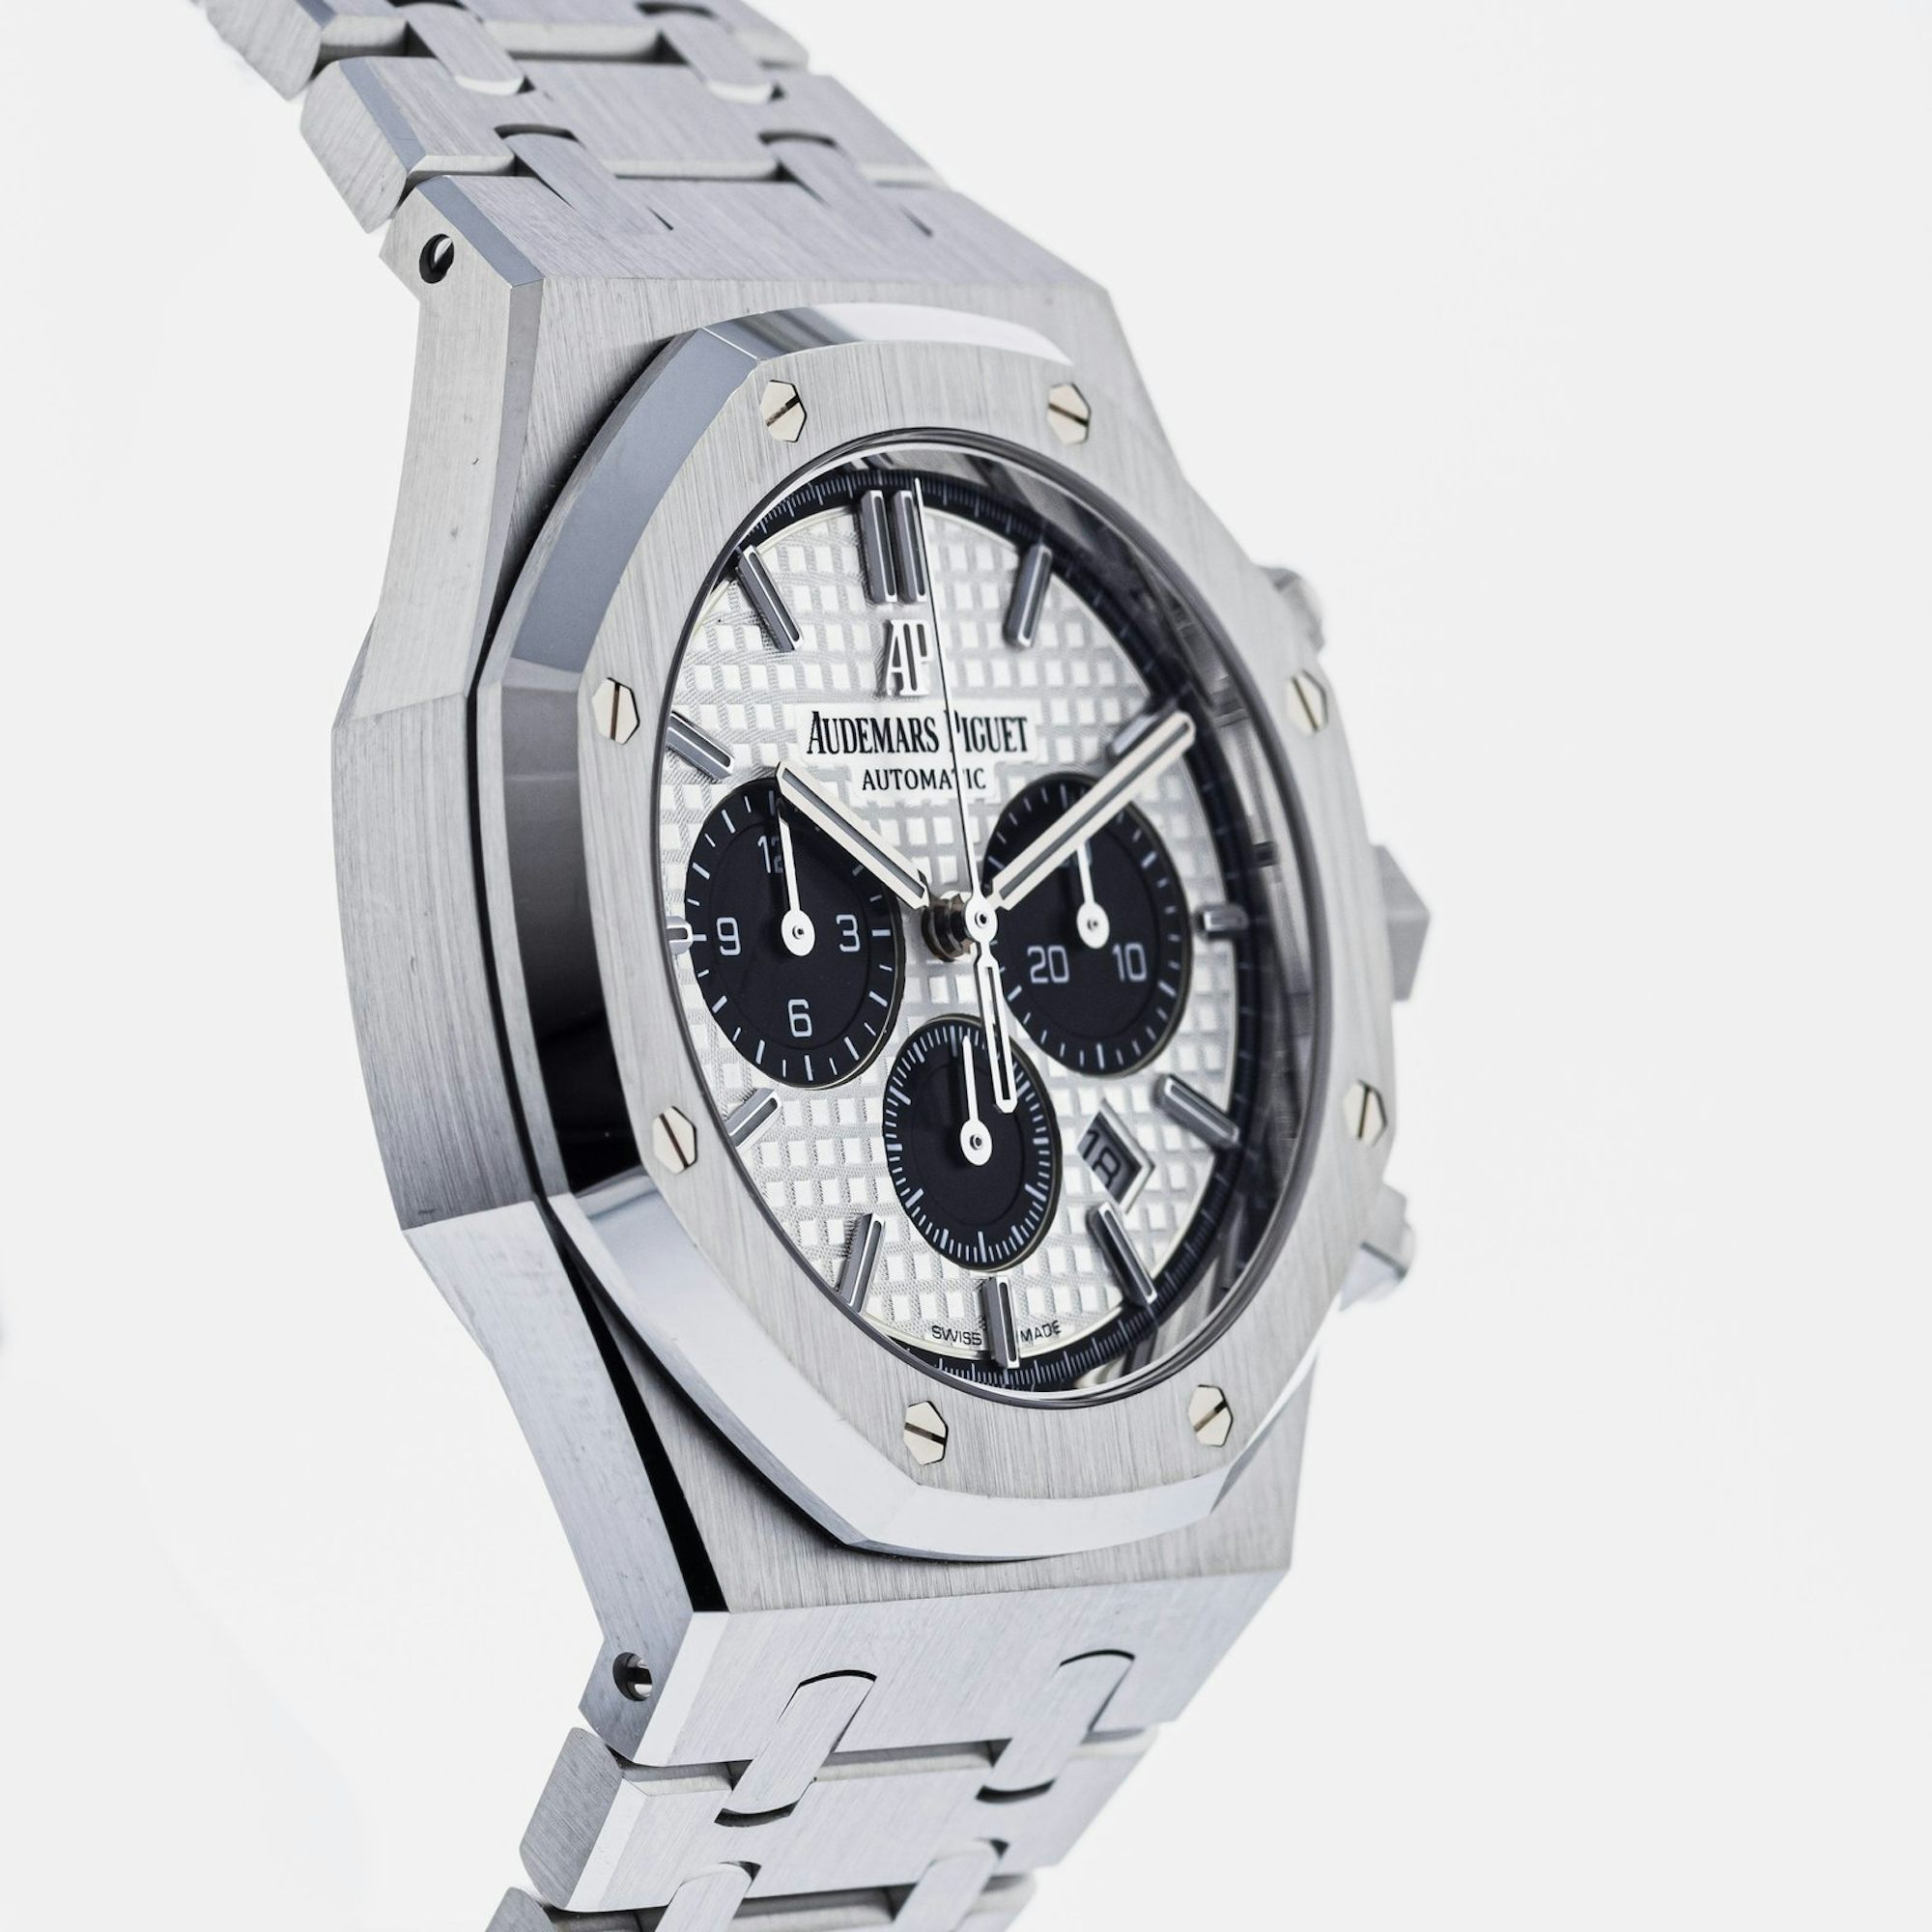 Three-year-old soldier shot by Audemars Piguet Royal Oak Chronograph 26331ST.OO.1220ST.03